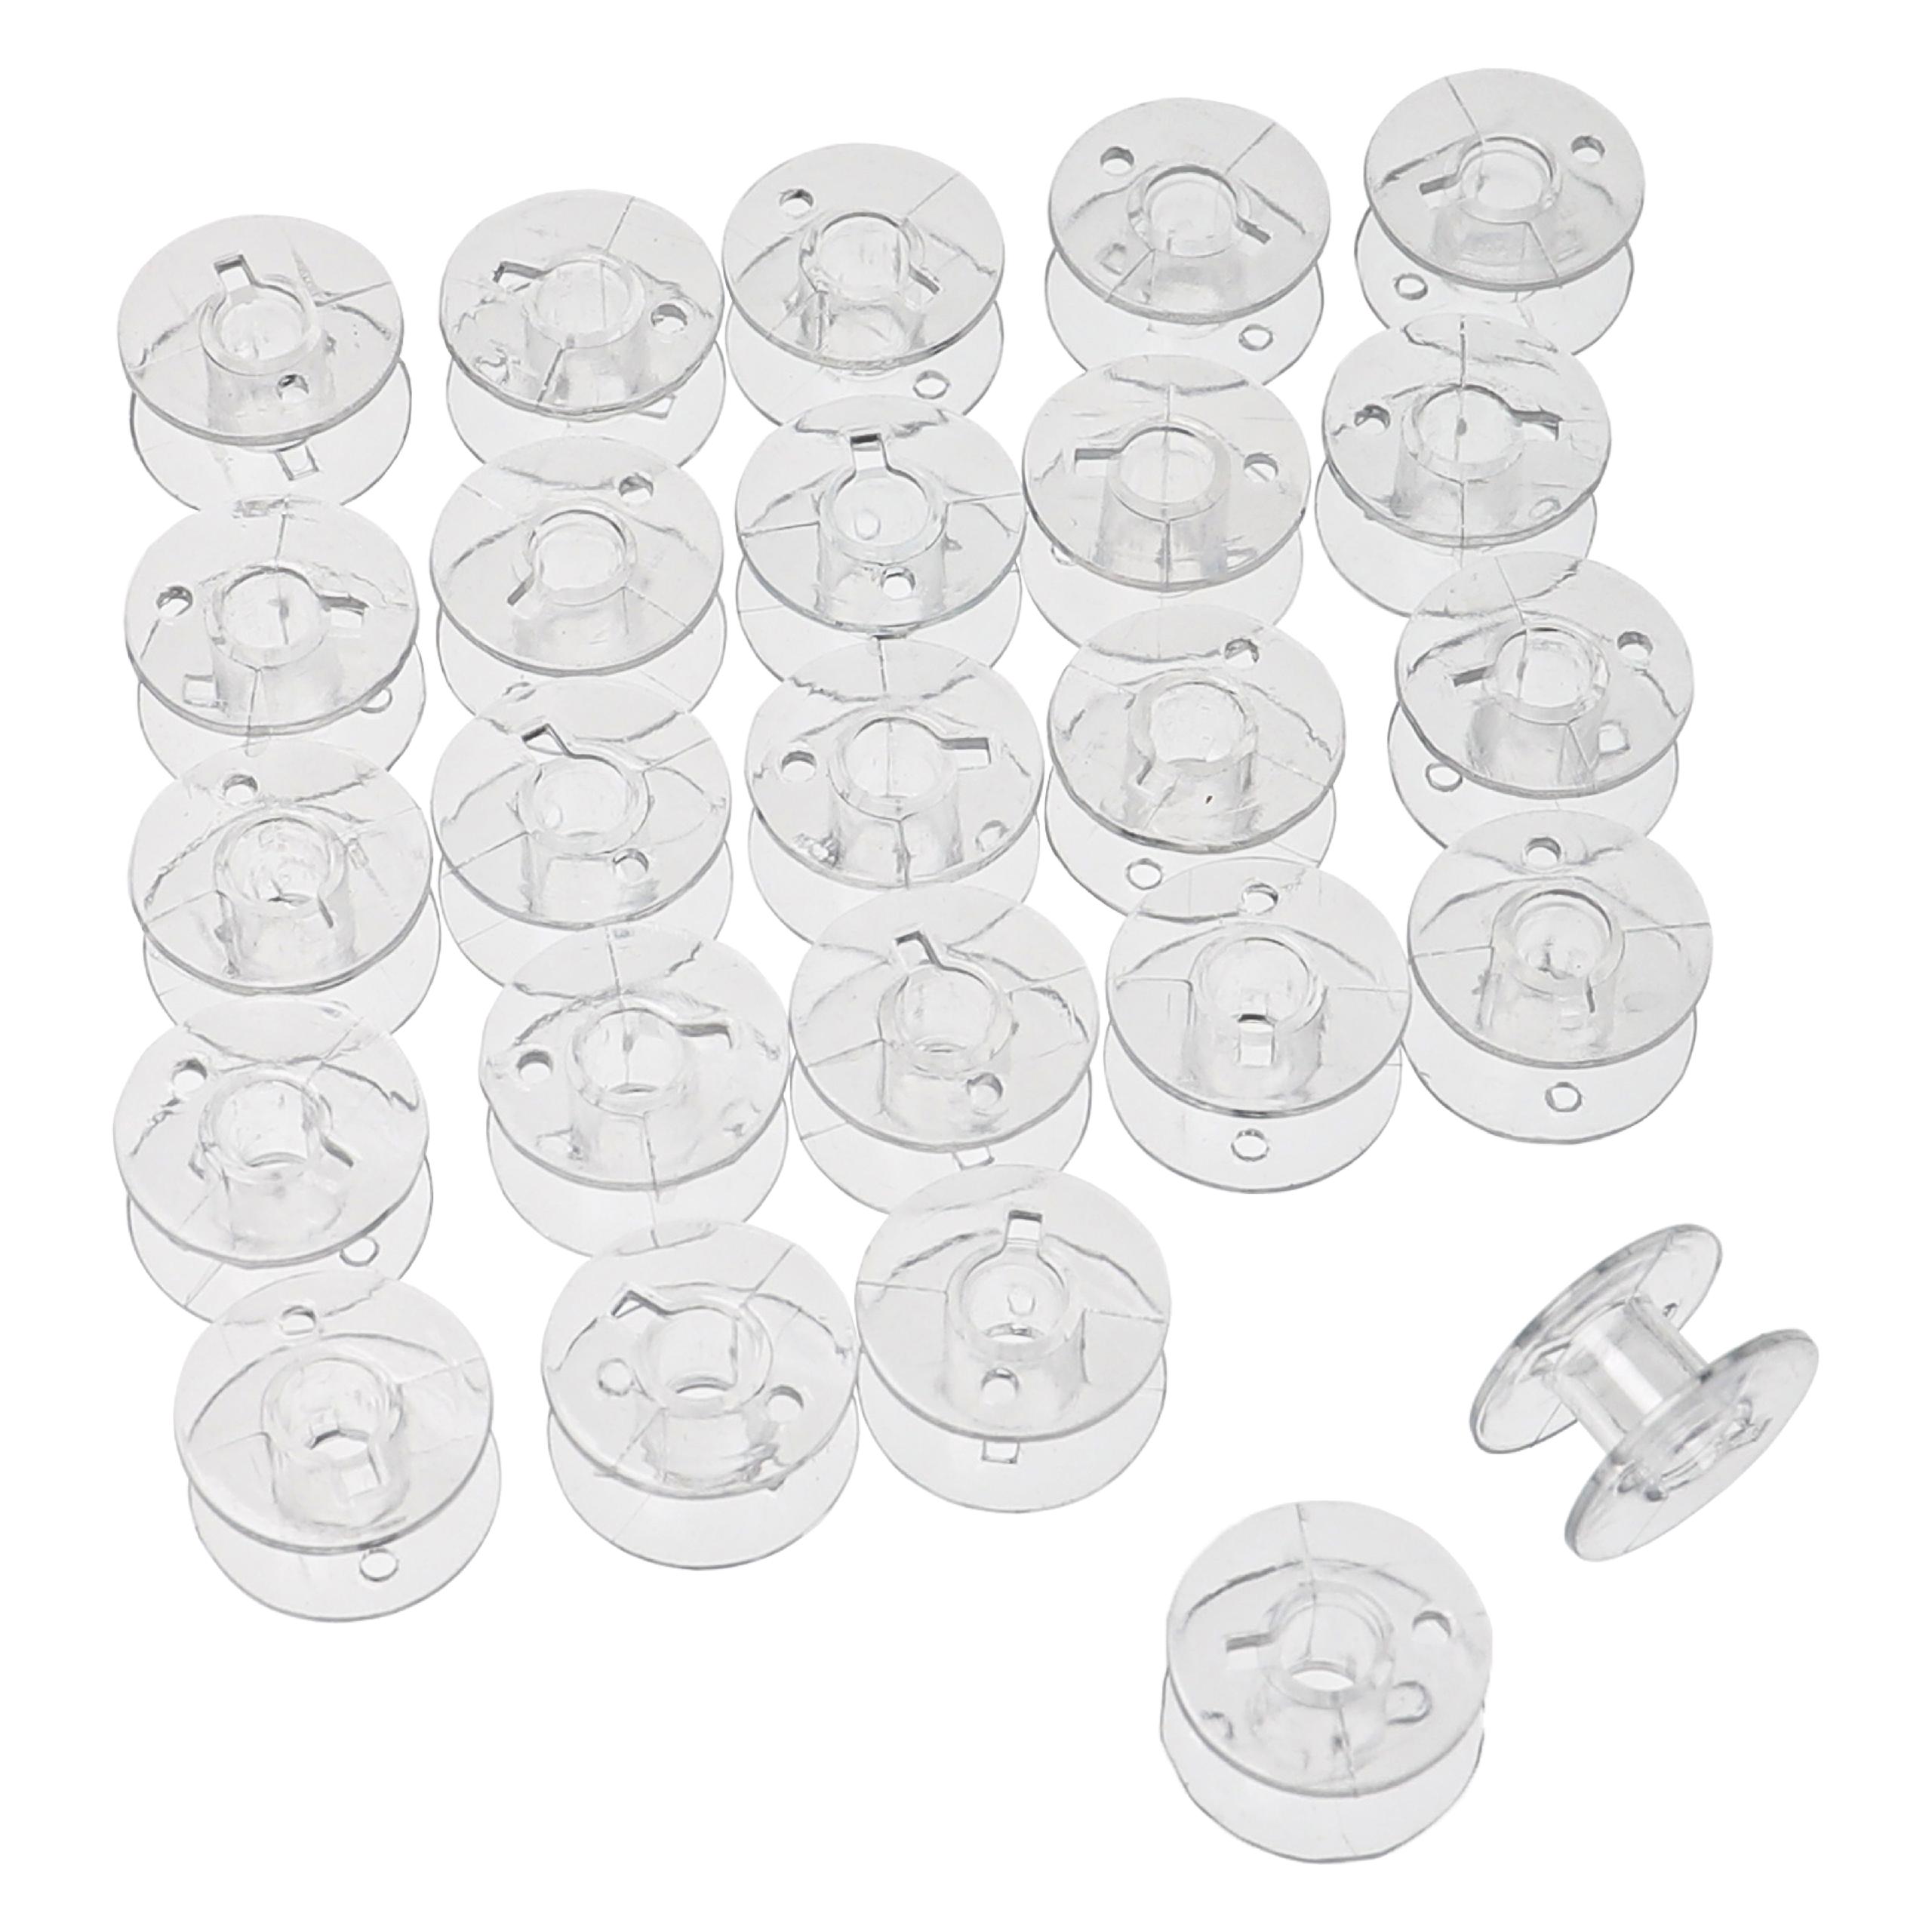 25x Lower Thread Spool for all Standard Sewing Machines e.g. Brother, Singer, Gritzner - plastic